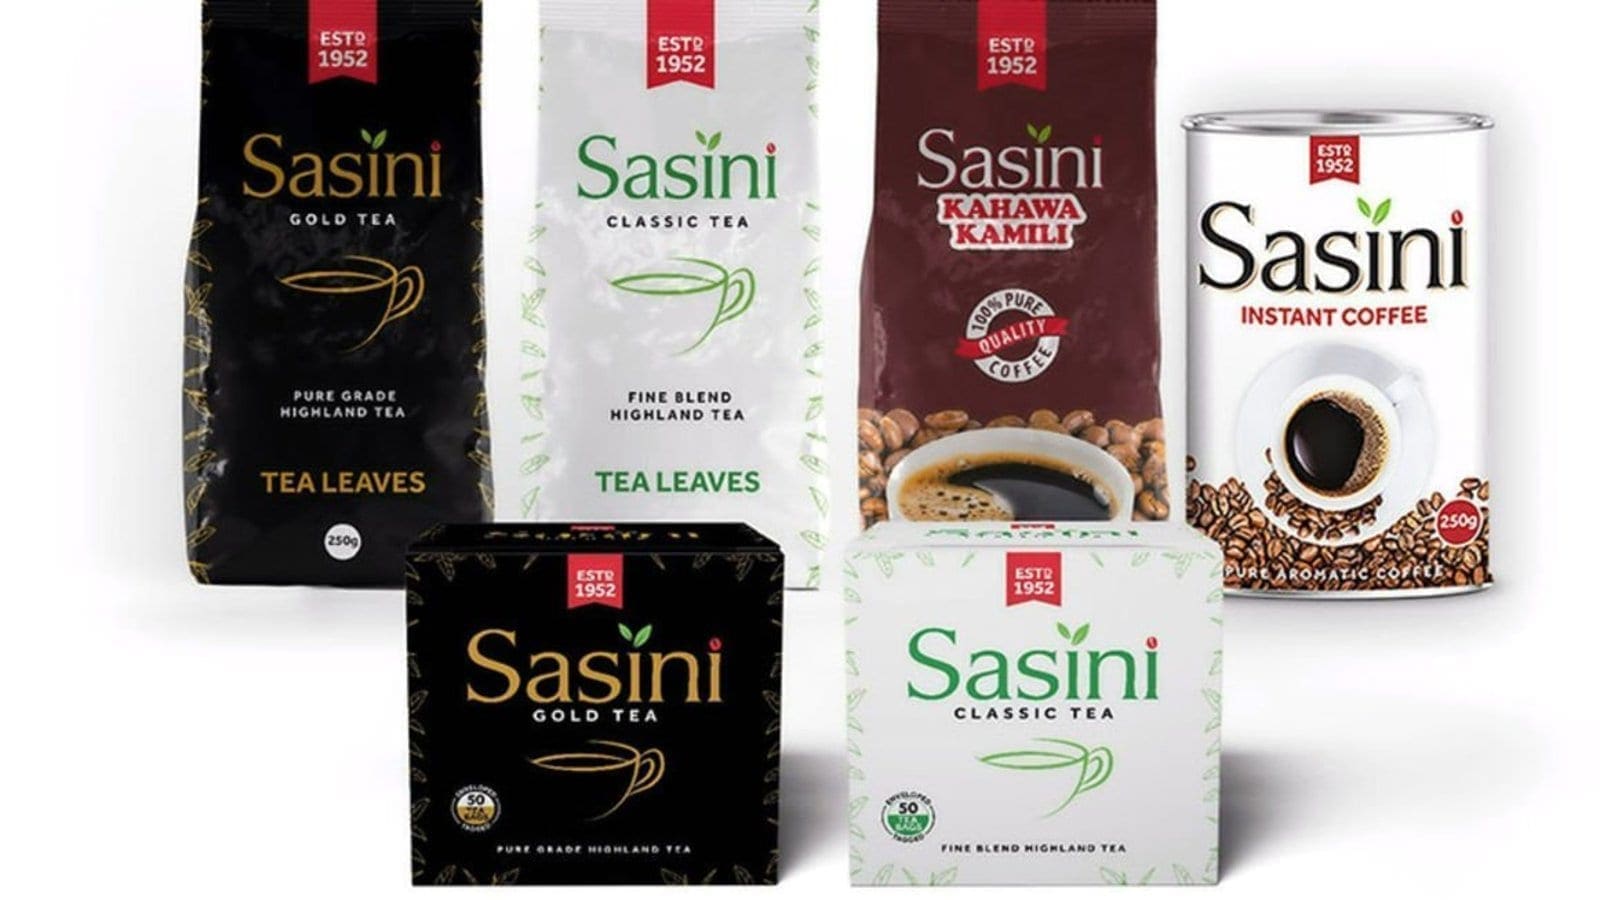 Sasini enhances liquidity position with US$6m investment in fixed income securities